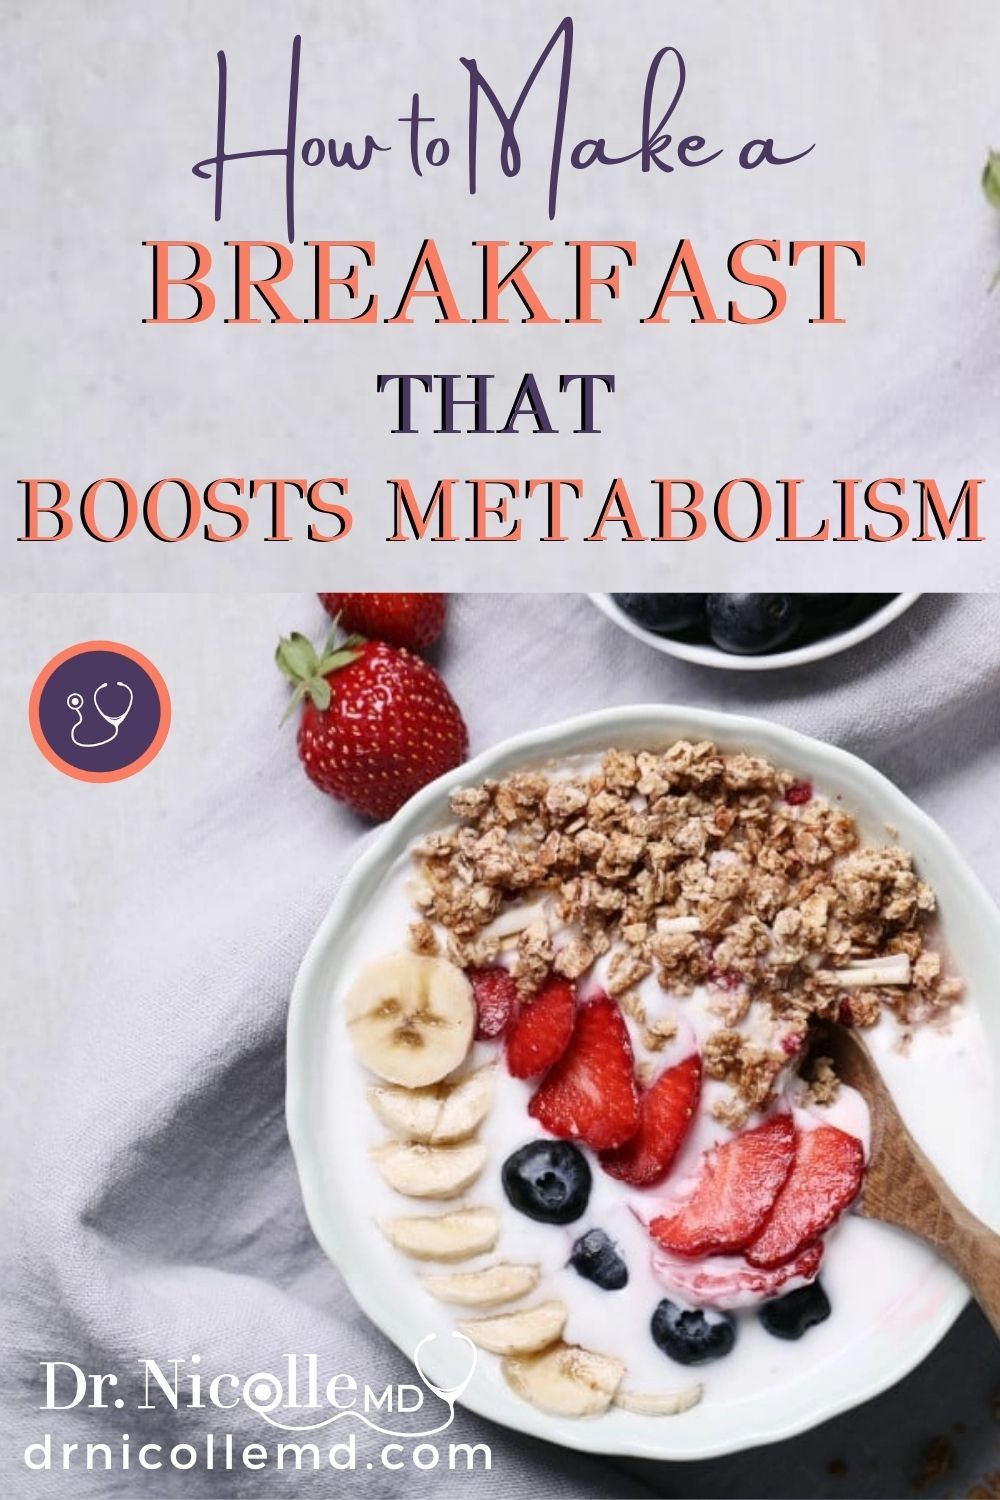 How to Make a Breakfast That Boosts Metabolism